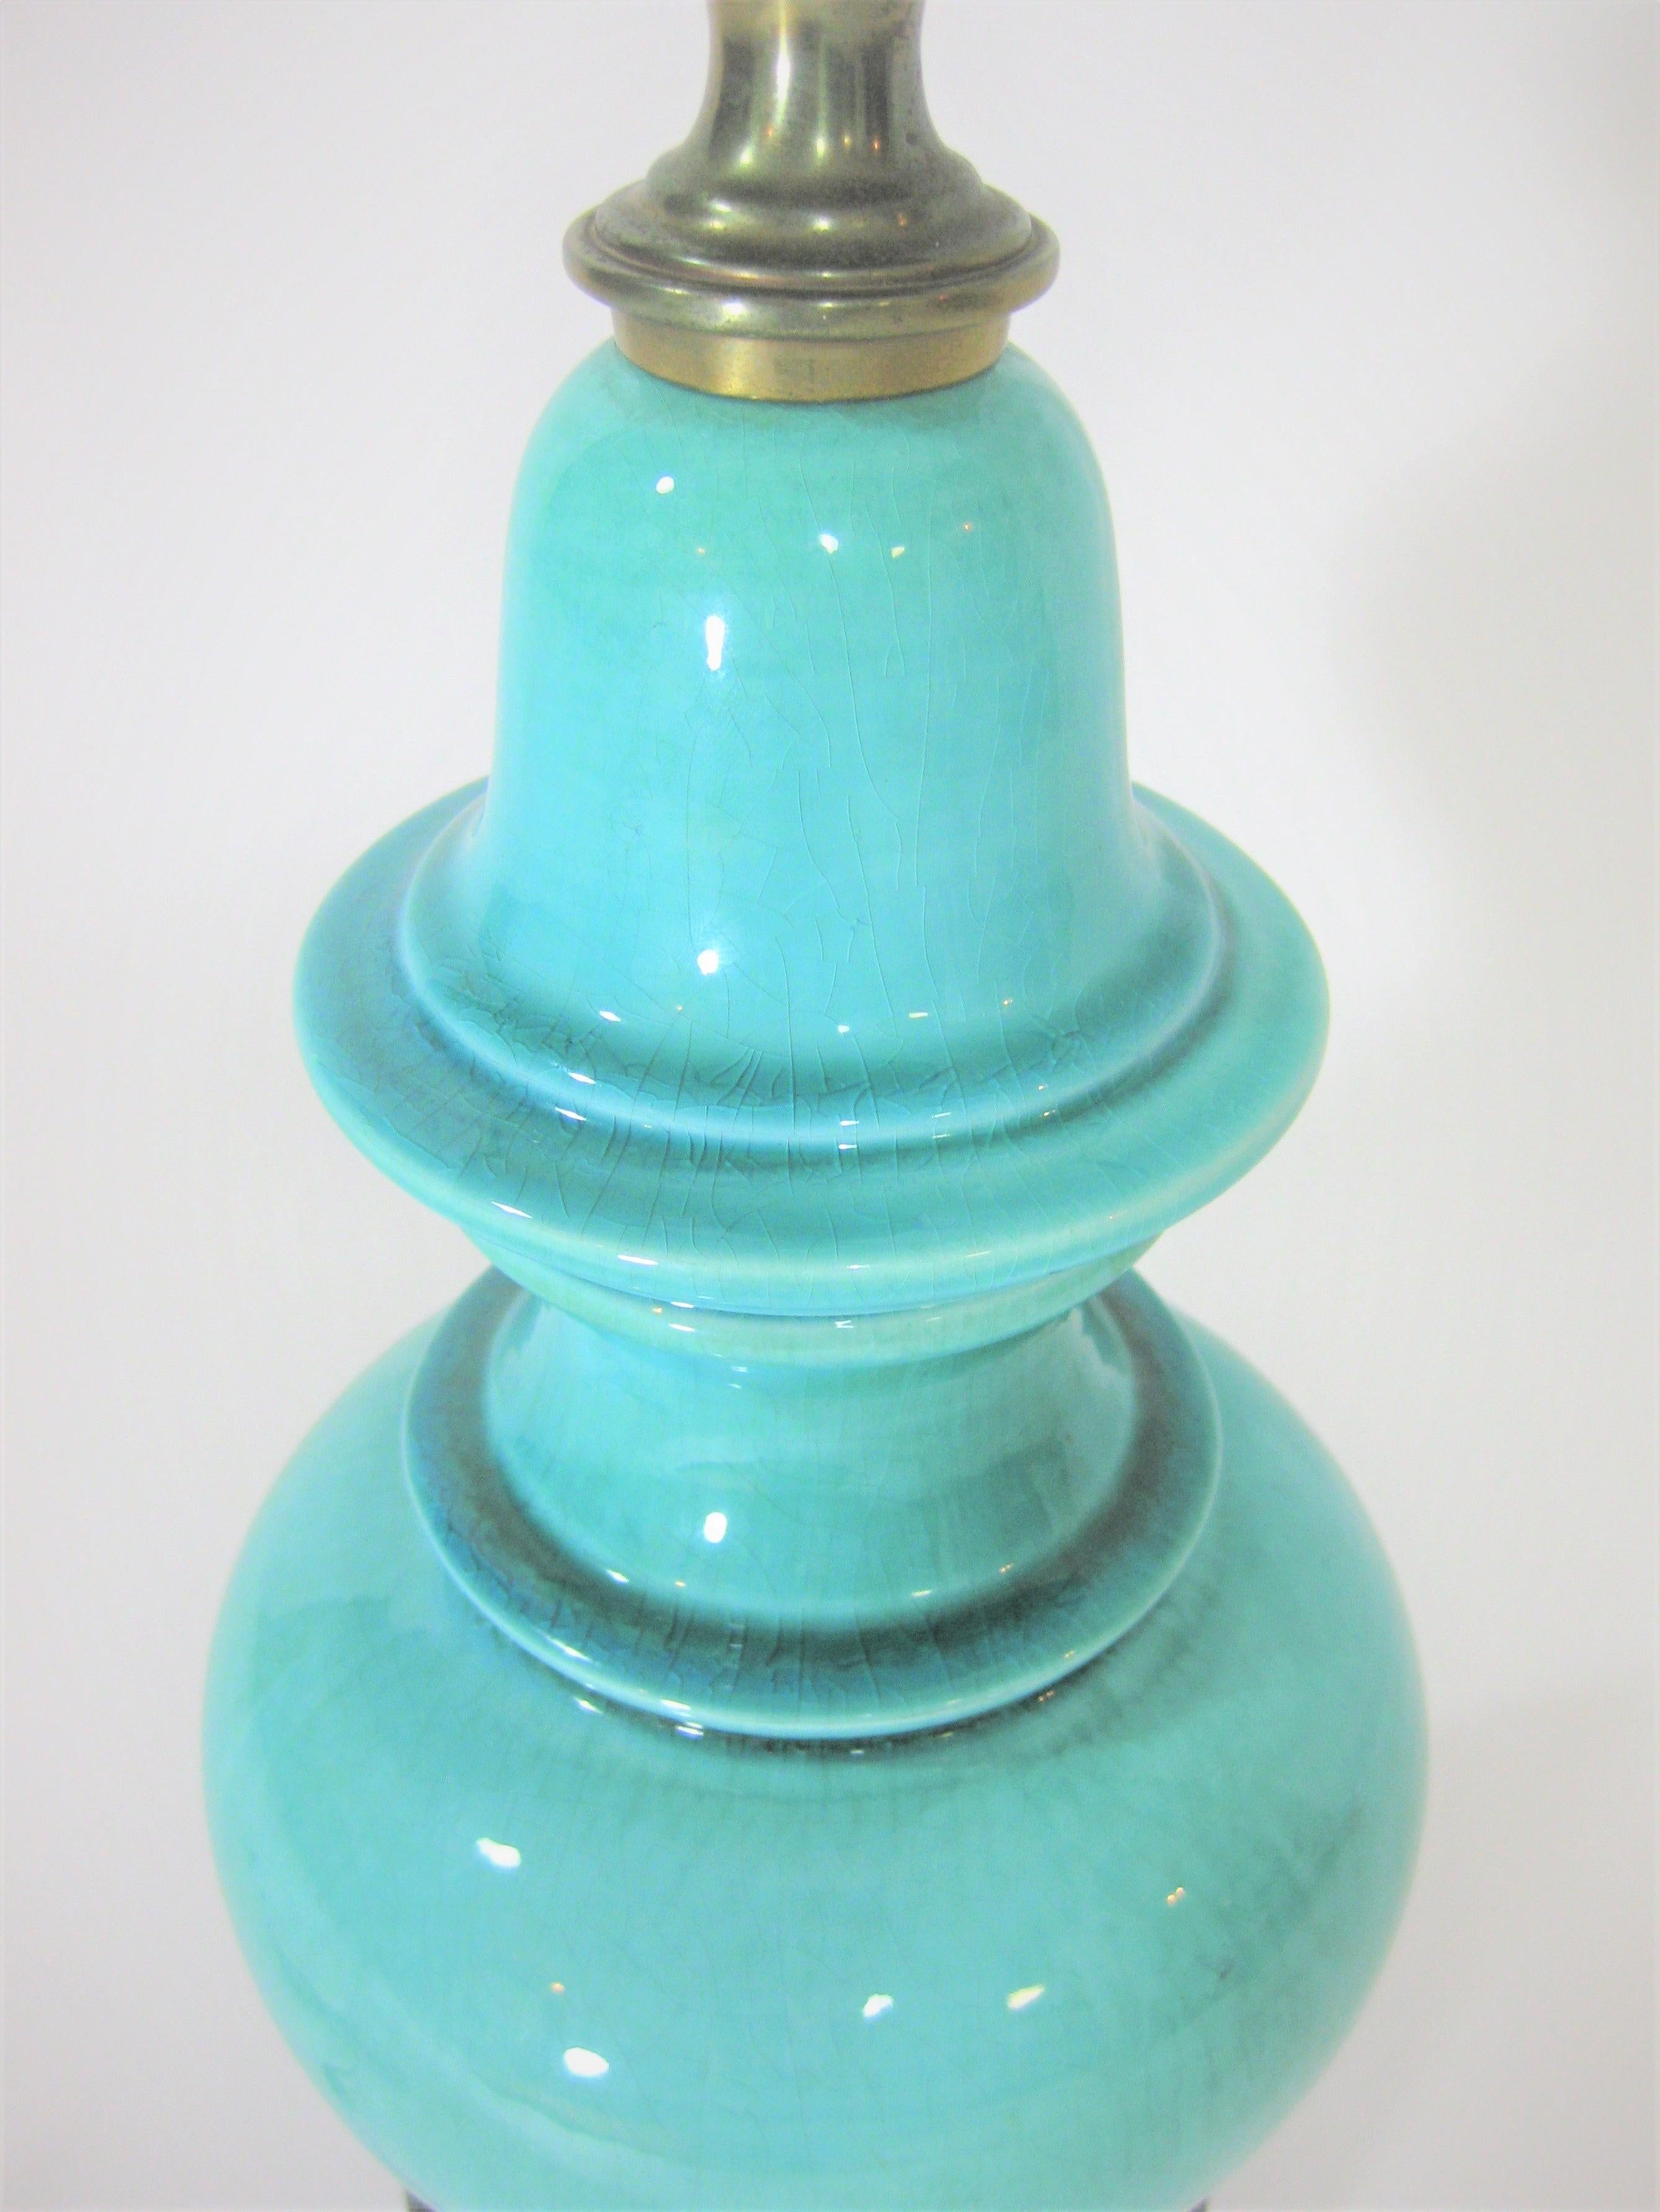 1950s Stiffel Lamp Turquoise Crackle Glaze Ceramic and Brass For Sale 2